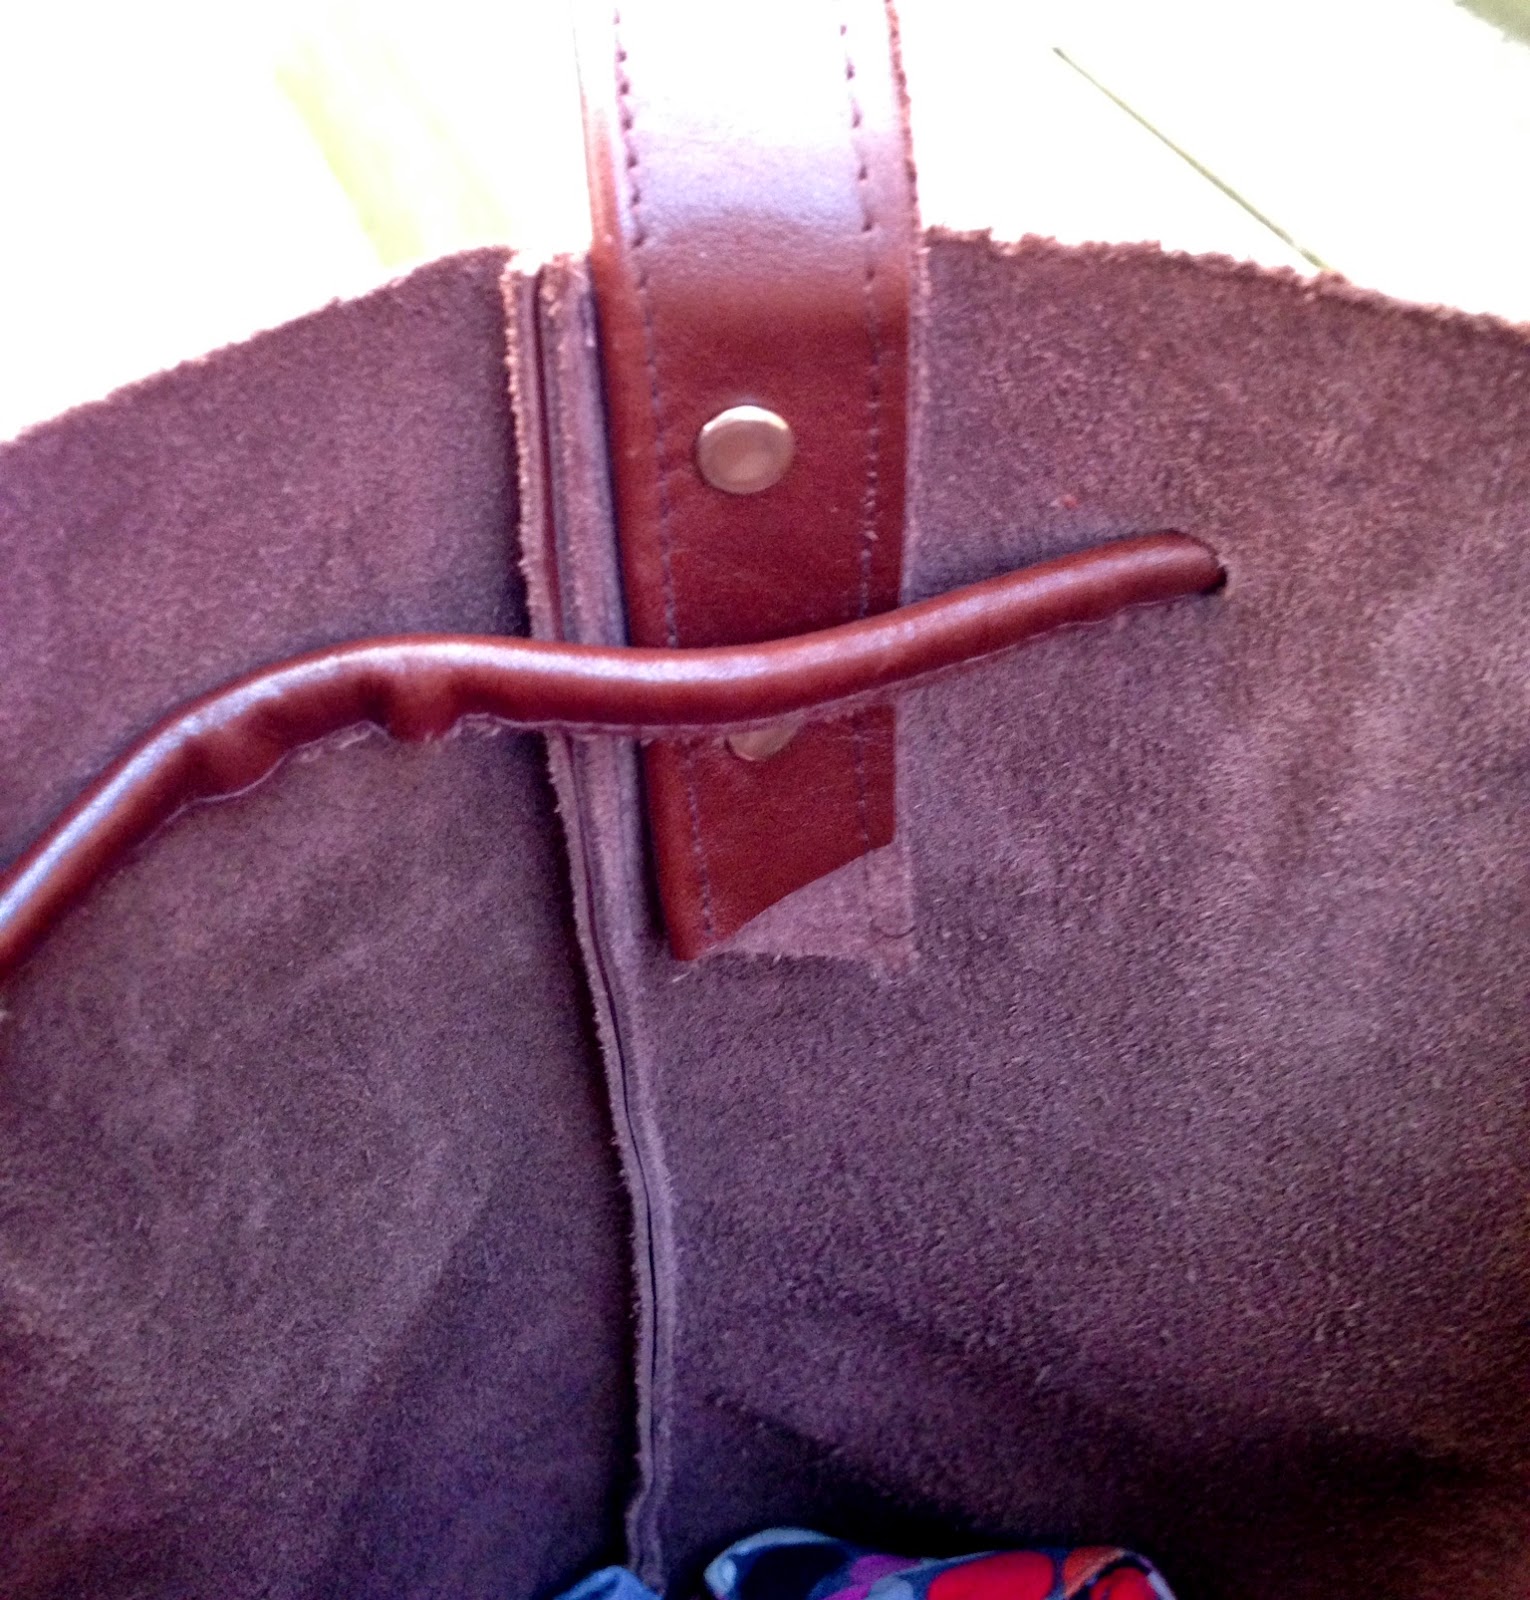 DIY Leather Bucket Bag - All Wrapped Up